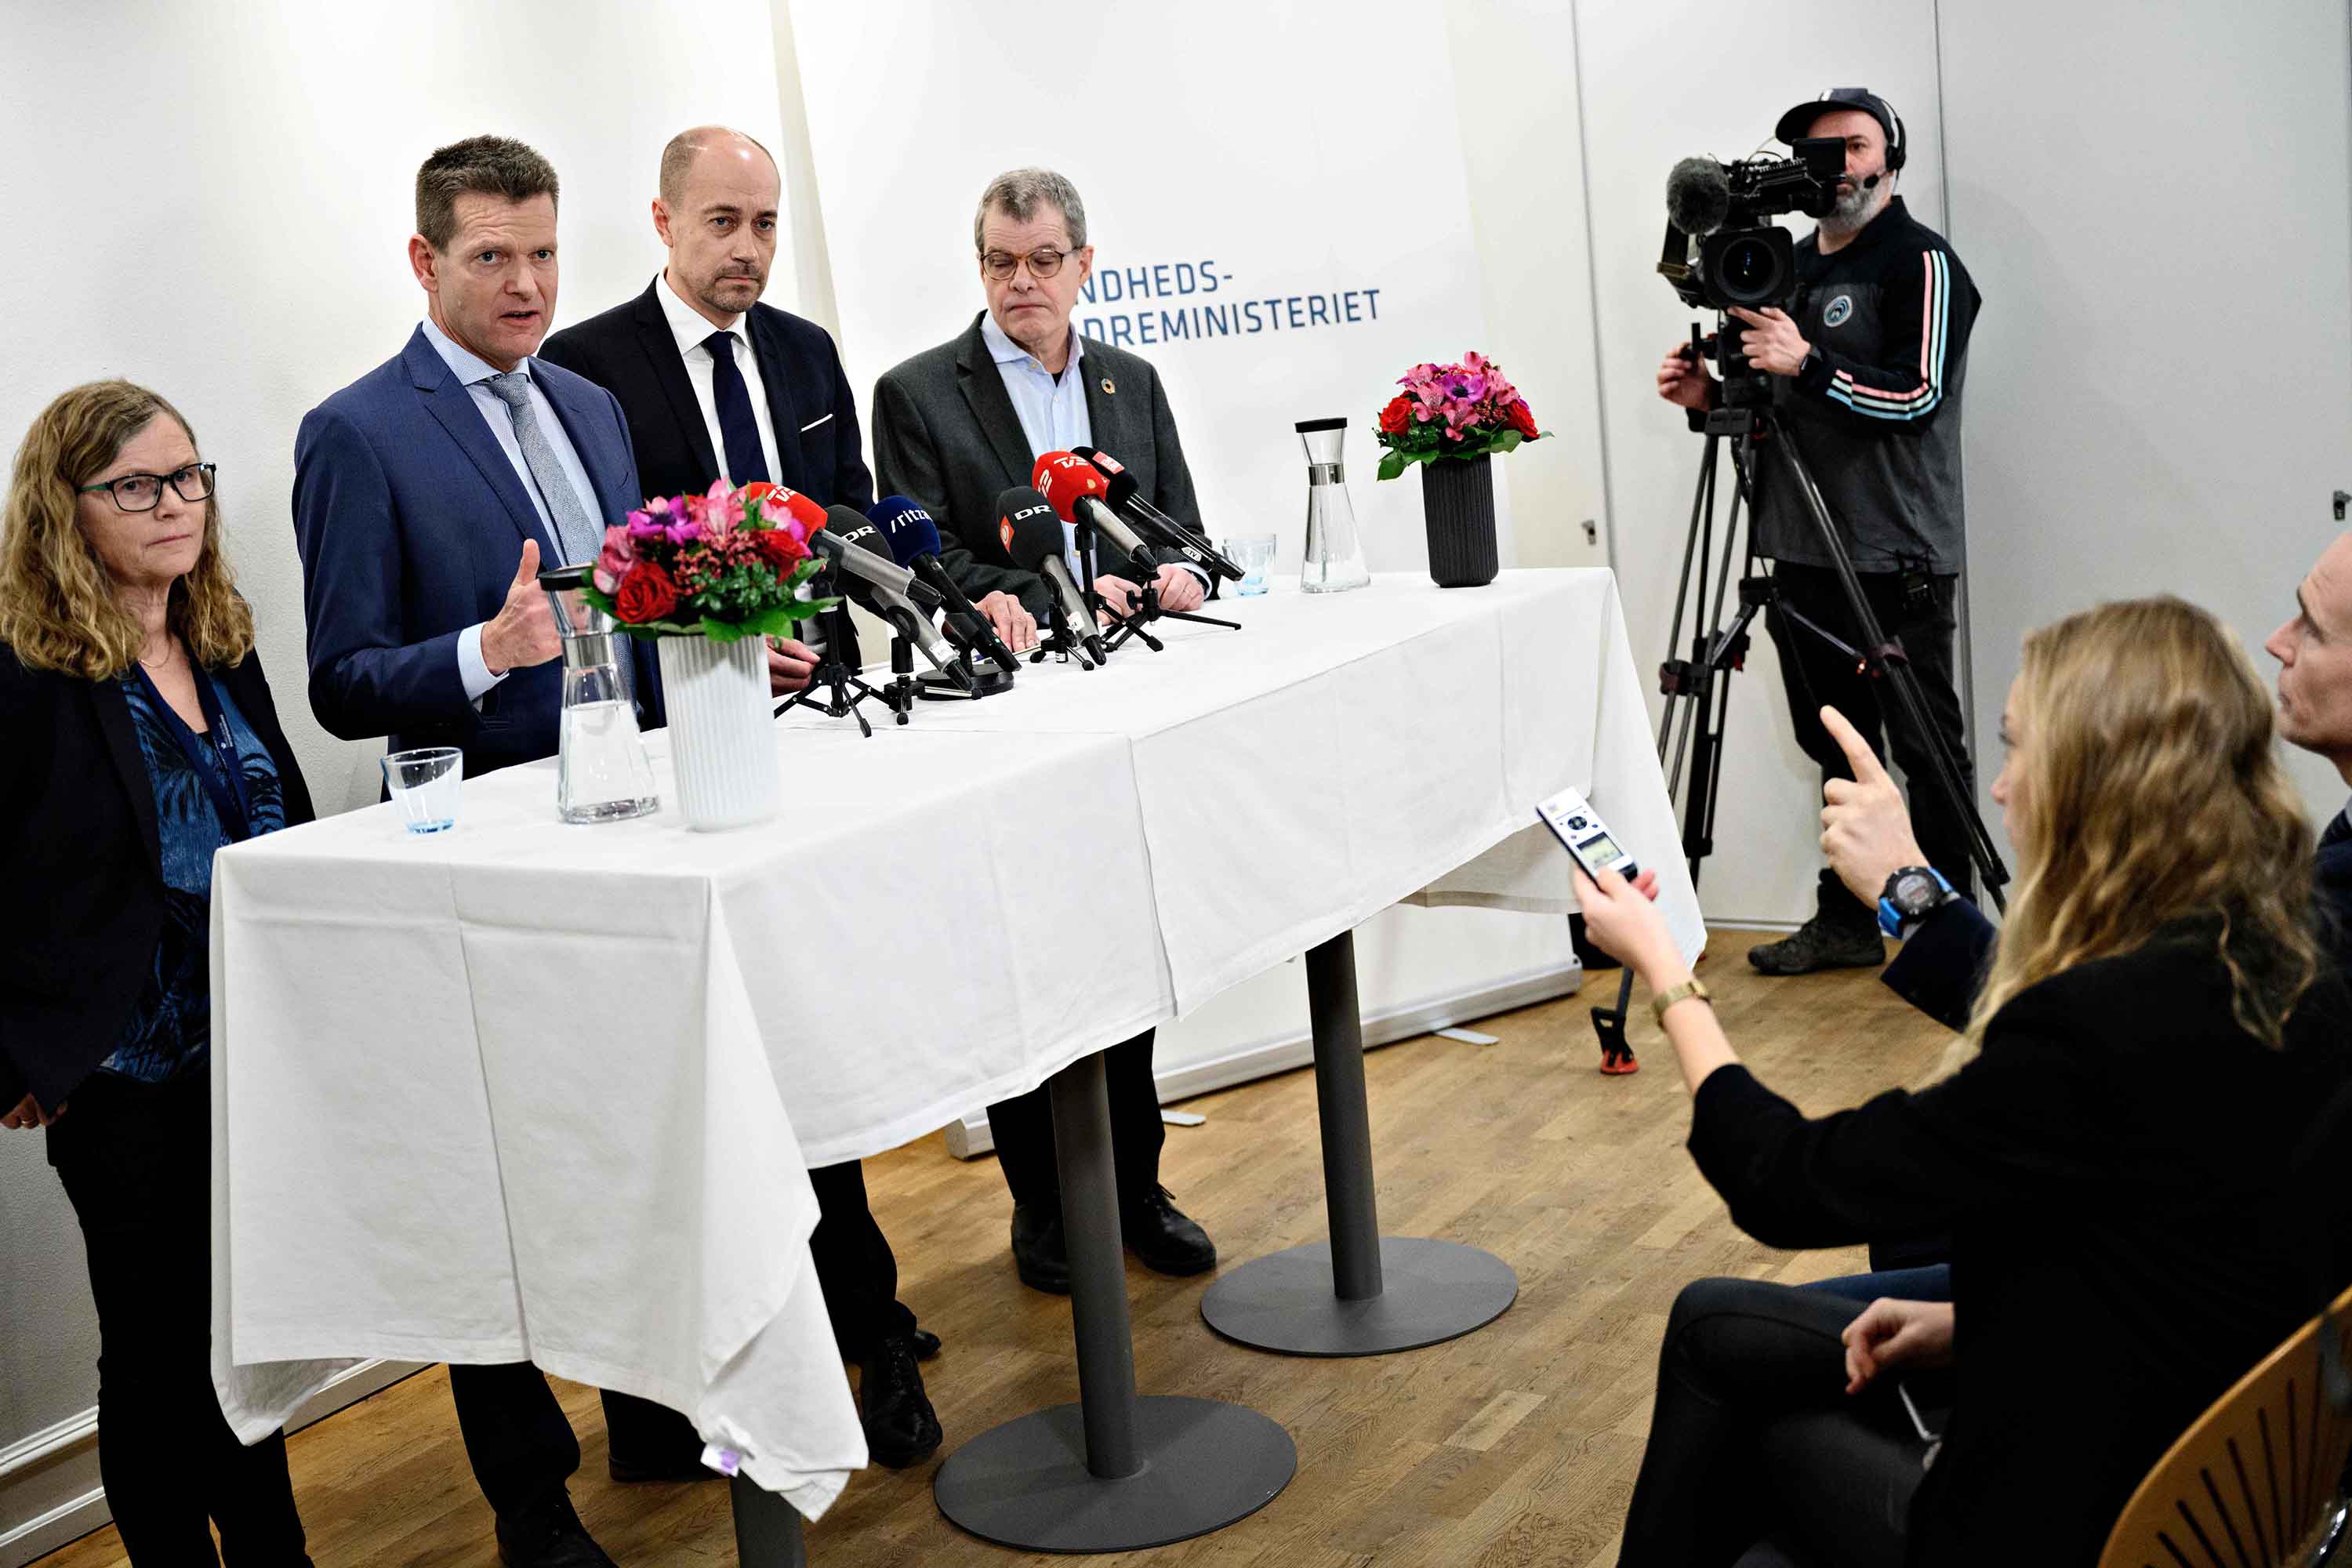 Director General of the Danish Health Authority, Søren Brostrøm, second from left, addresses a press conference on Thursday in Copenhagen regarding the first case of coronavirus detected in the country.